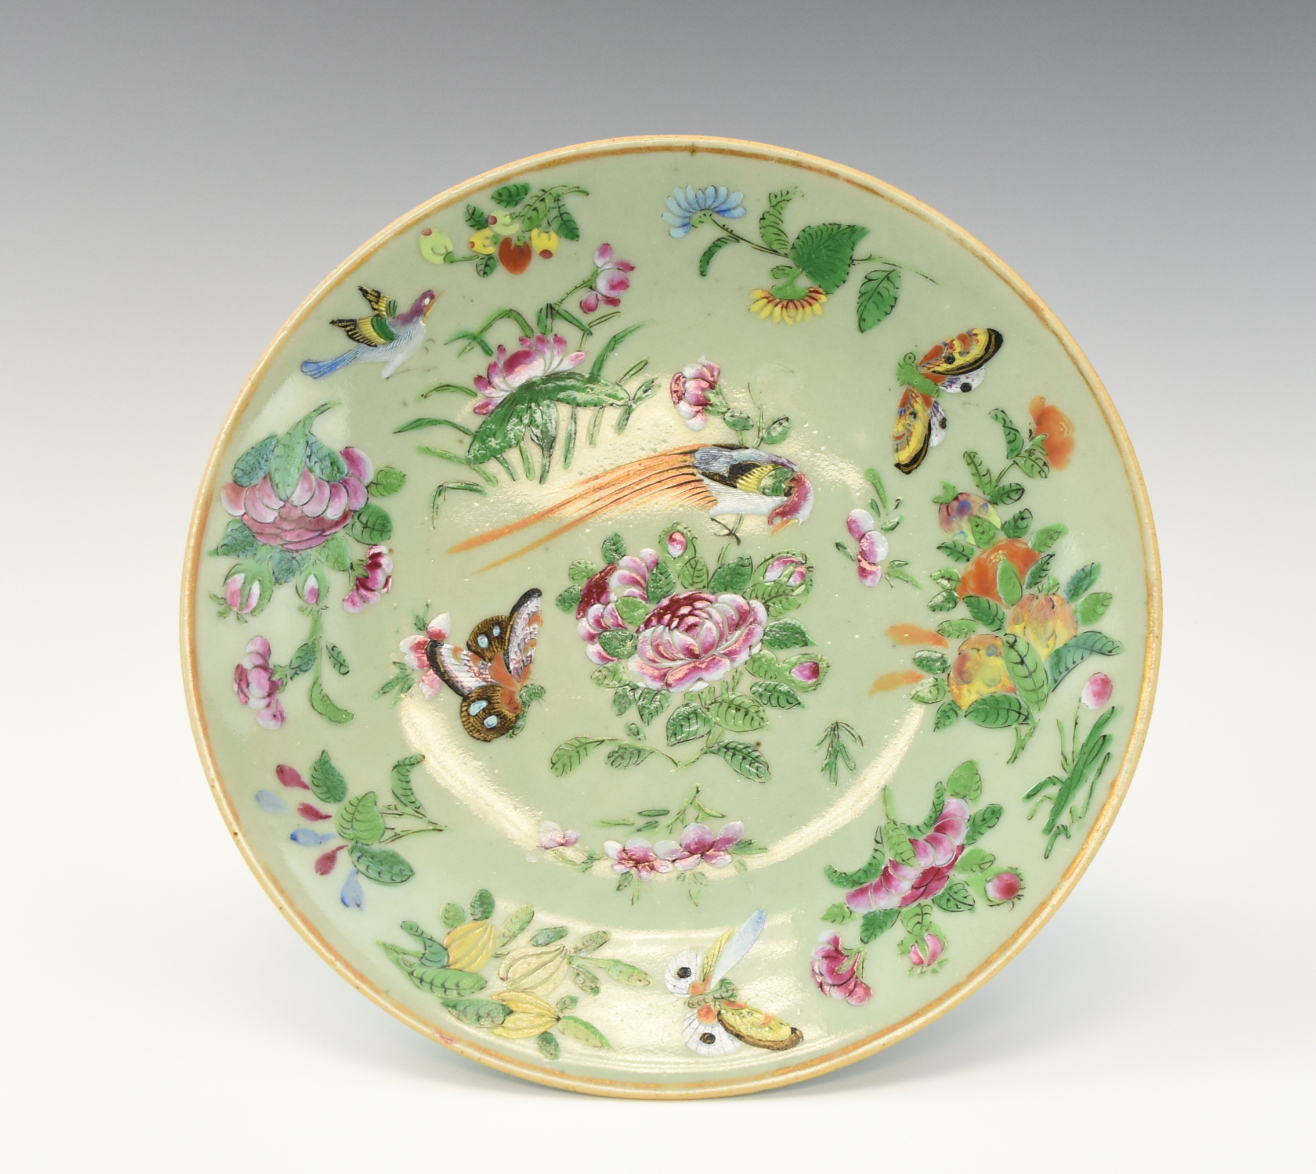 CHINESE CELADON & FAMILLE ROSE PLATE,19TH